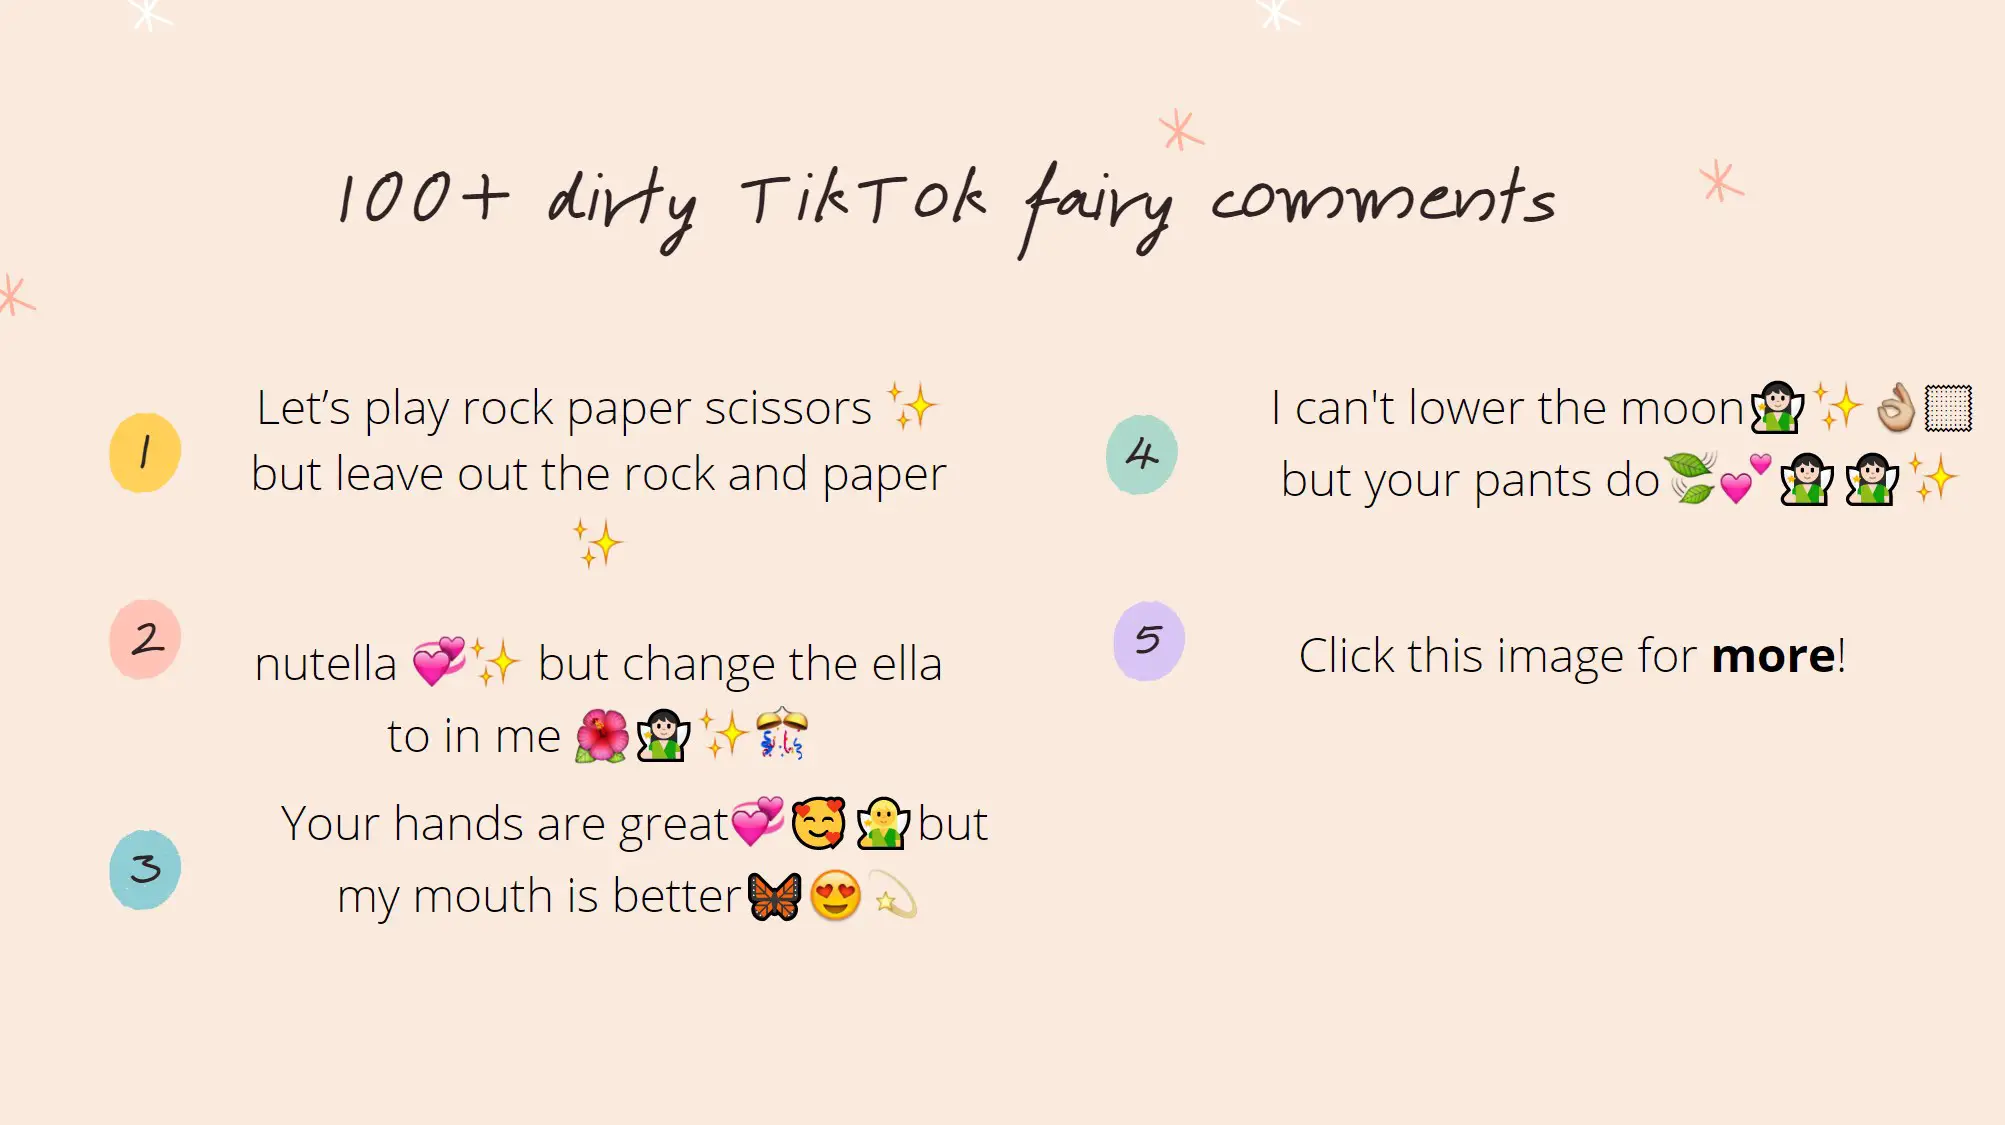 flirty-and-dirty-fairy-comments